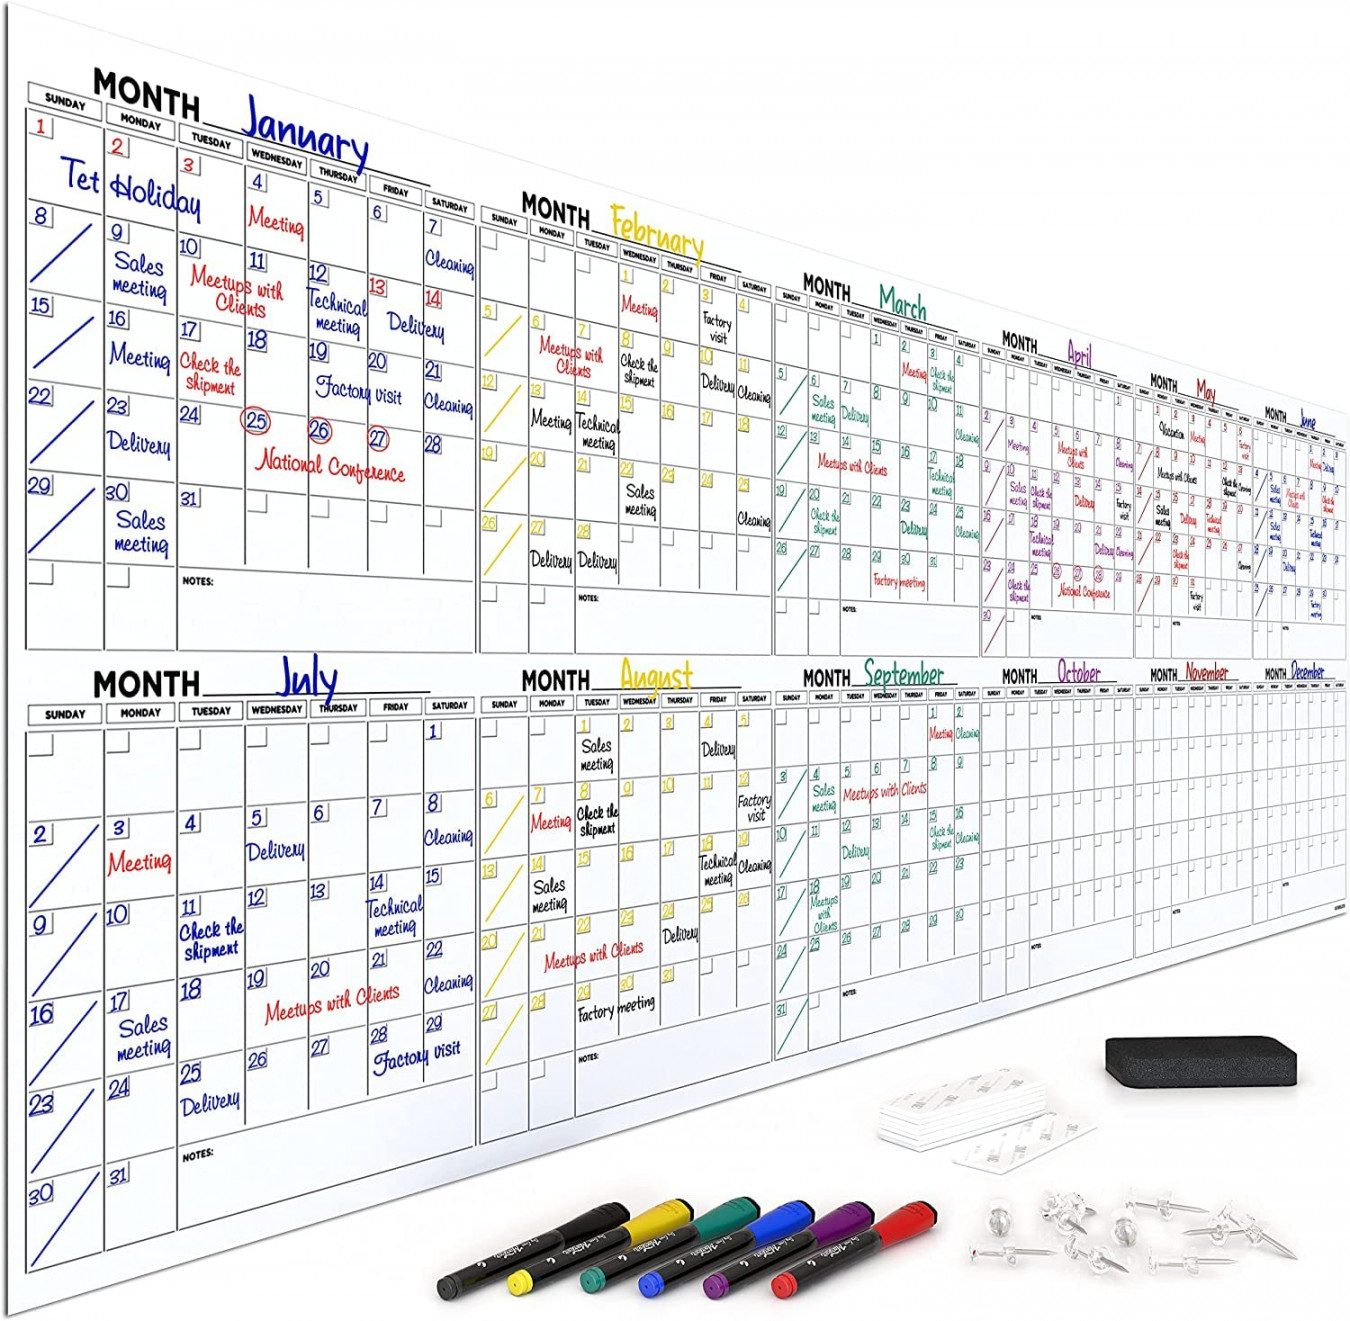 Extra Large "x" White Board Calendar Dry Erase Calendar for Wall   Month Planner Big Dry EraseSee more Extra Large "x" White Board